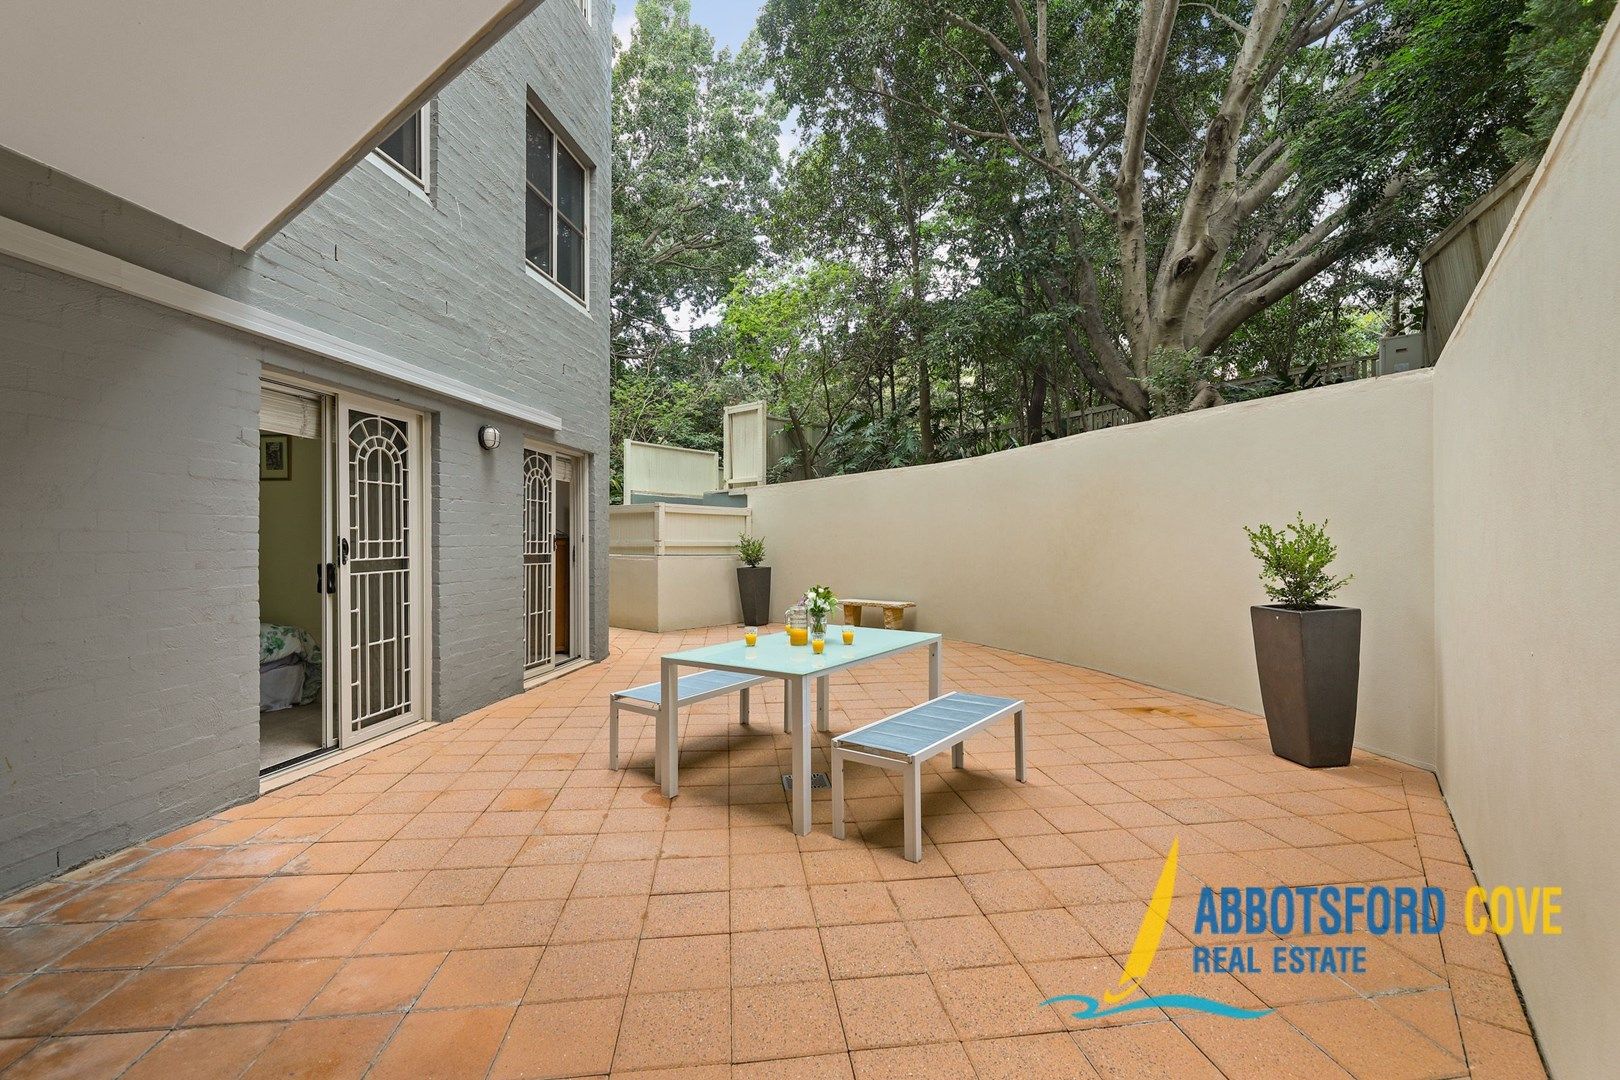 22/1 Harbourview Crescent, Abbotsford NSW 2046, Image 0